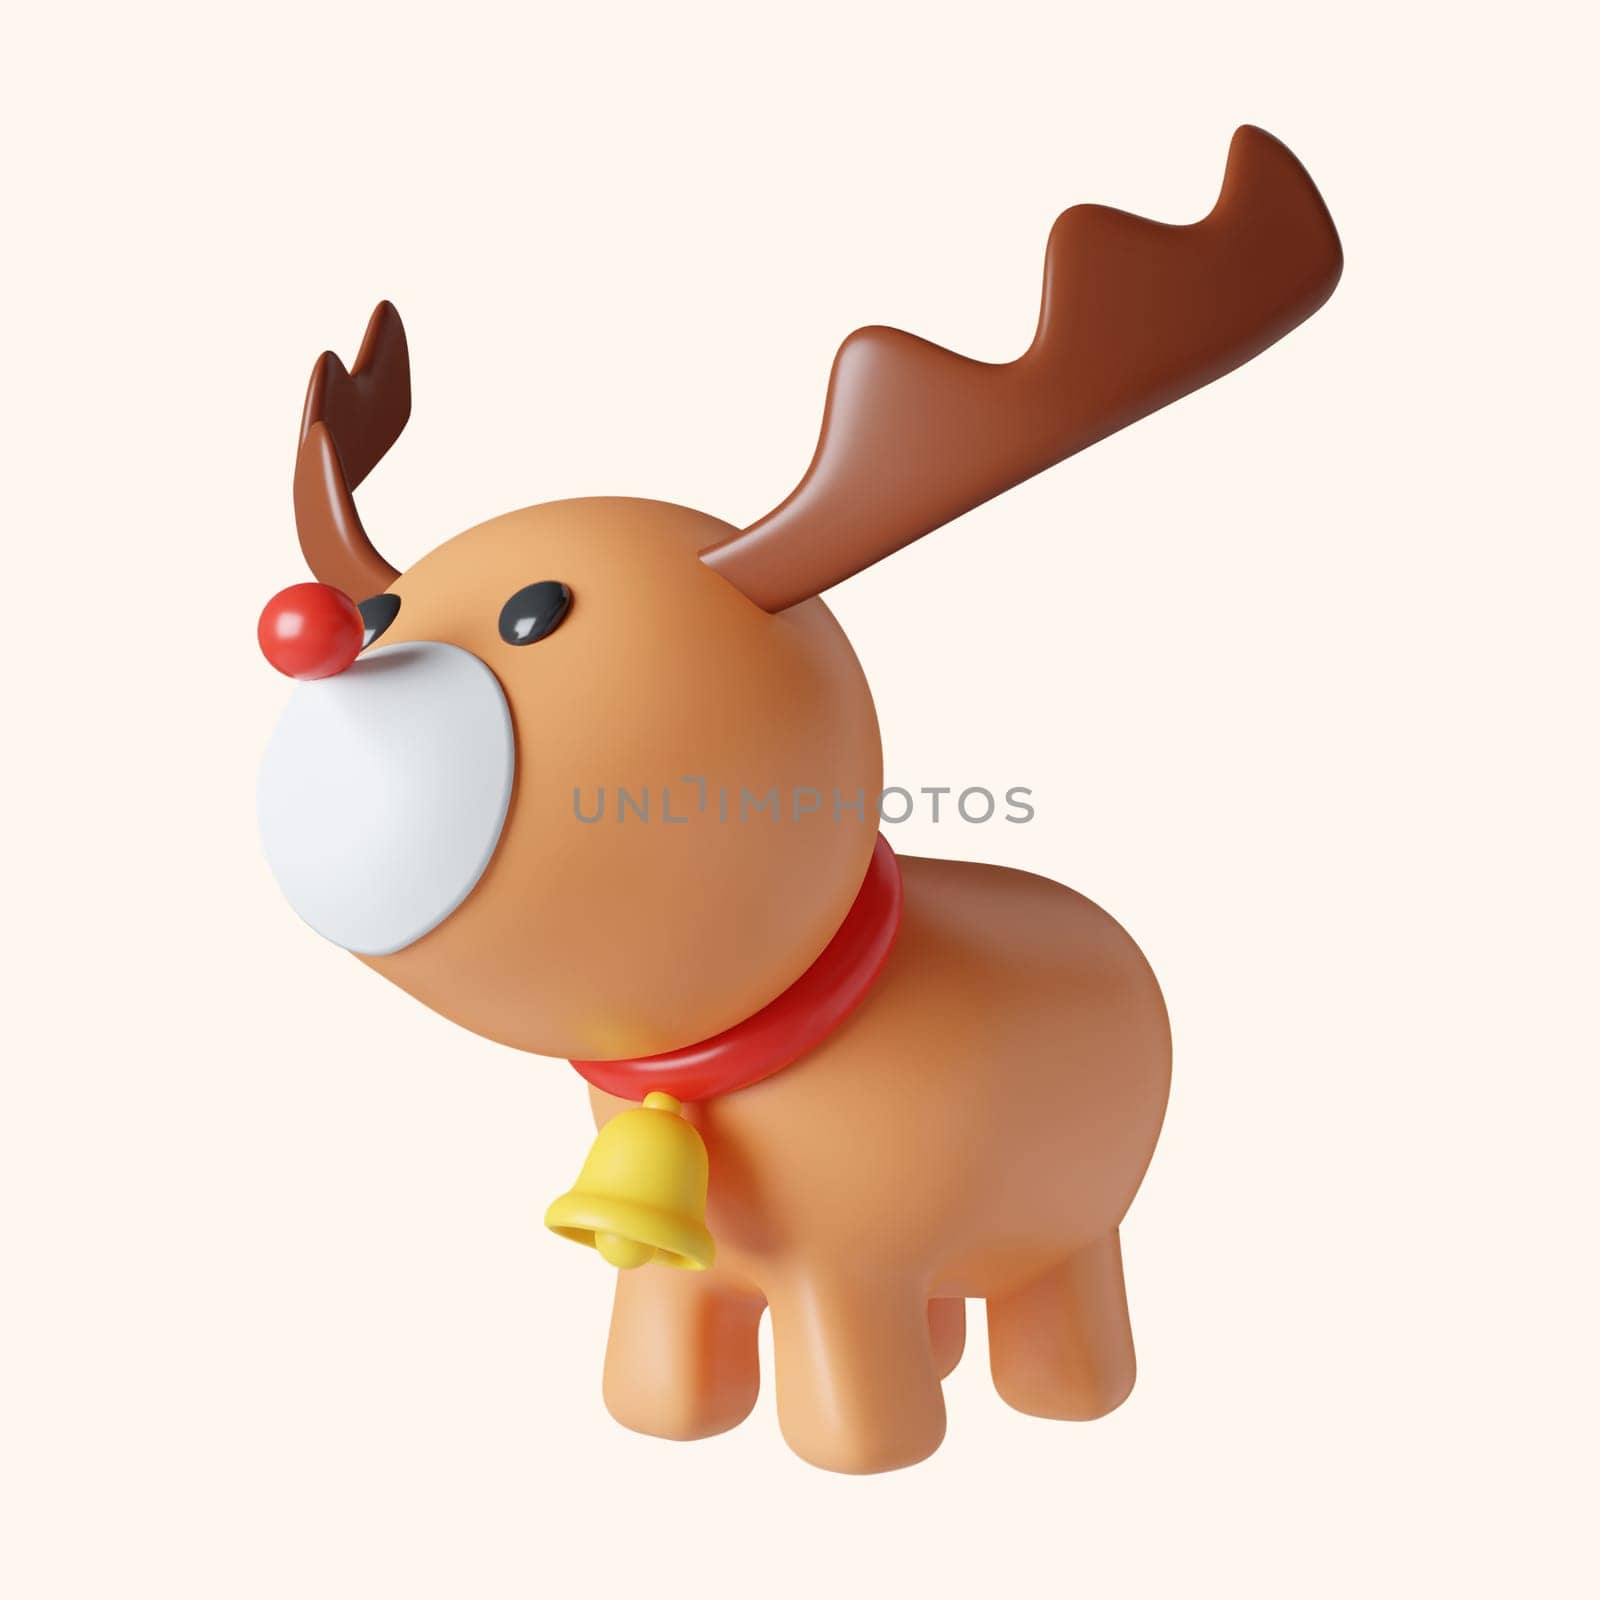 3d Christmas deer icon. minimal decorative festive conical shape tree. New Year's holiday decor. 3d design element In cartoon style. Icon isolated on white background. 3D illustration.